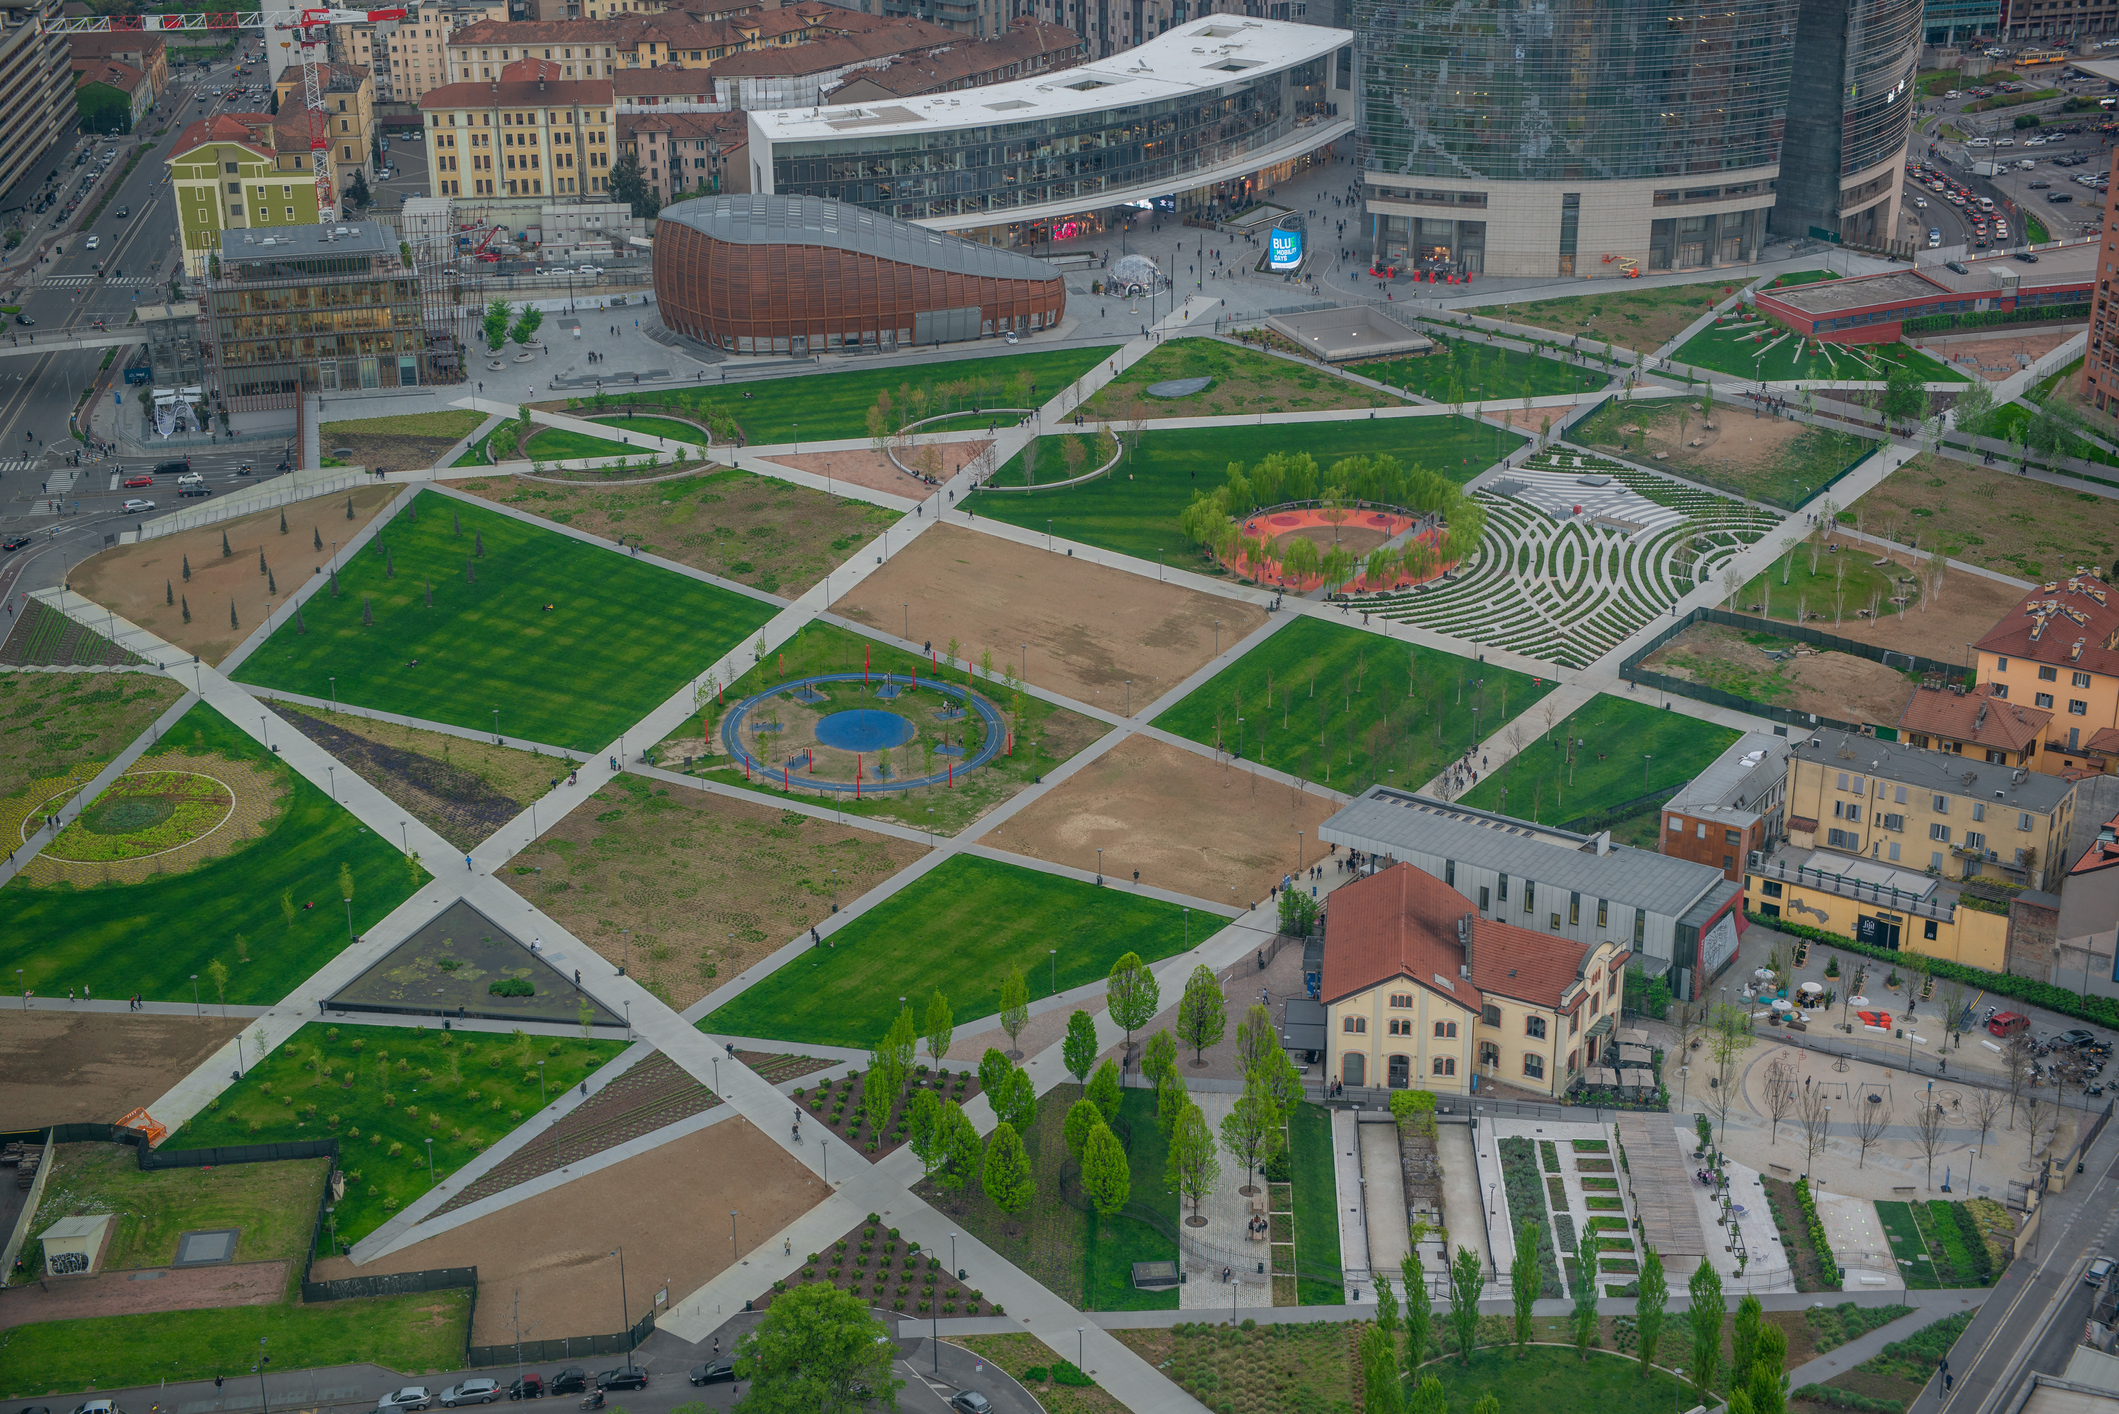 Milan from the sky, peri-urban agriculture, Credits pierluigipalazzi